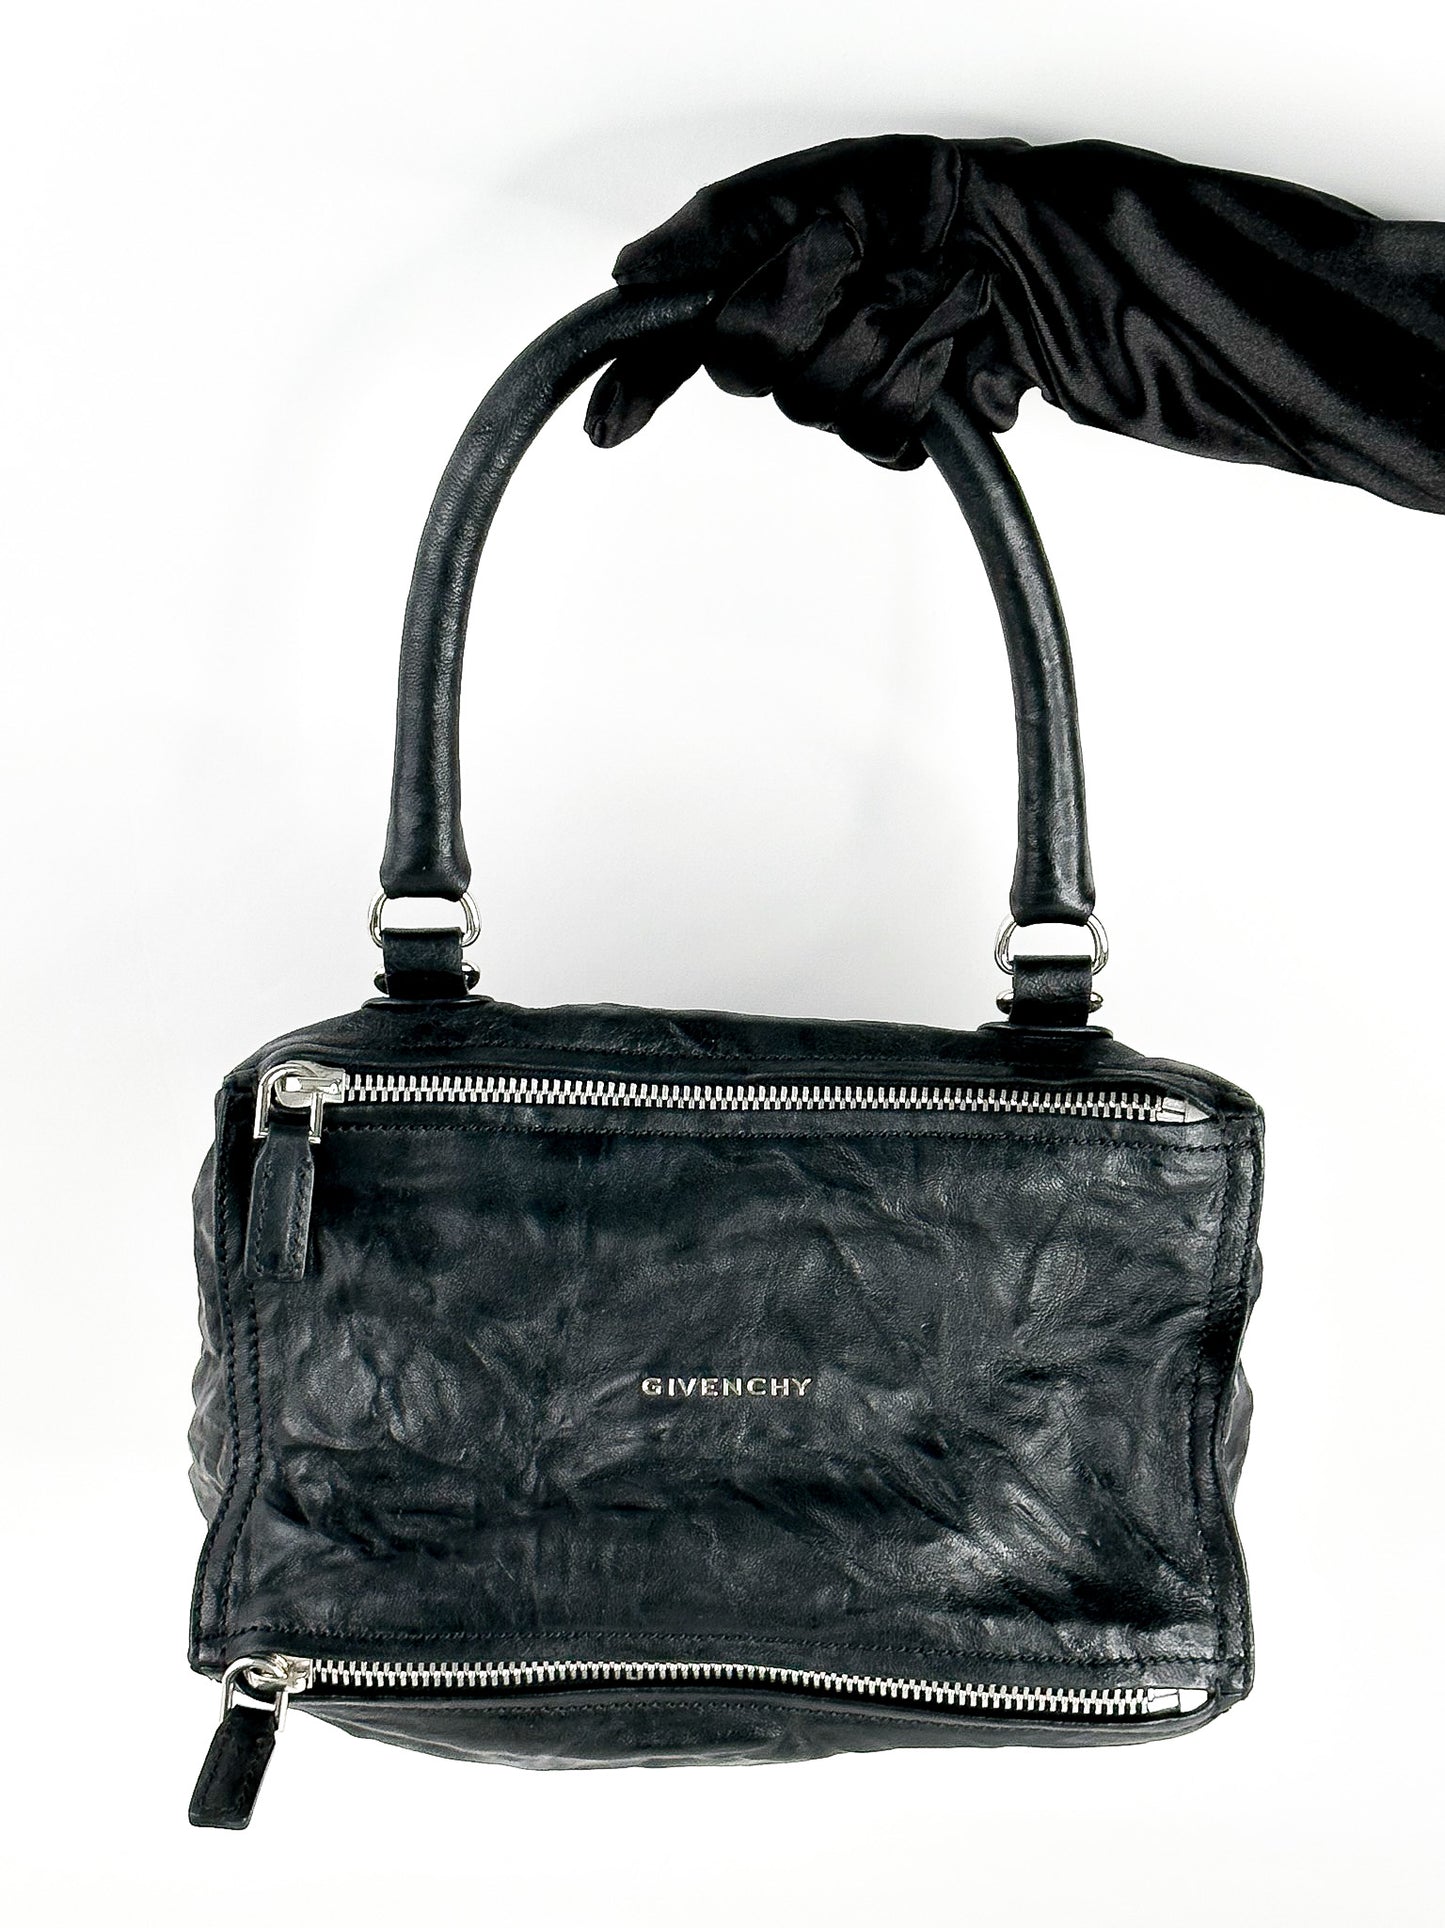 Givenchy Pandora Aged Leather Small